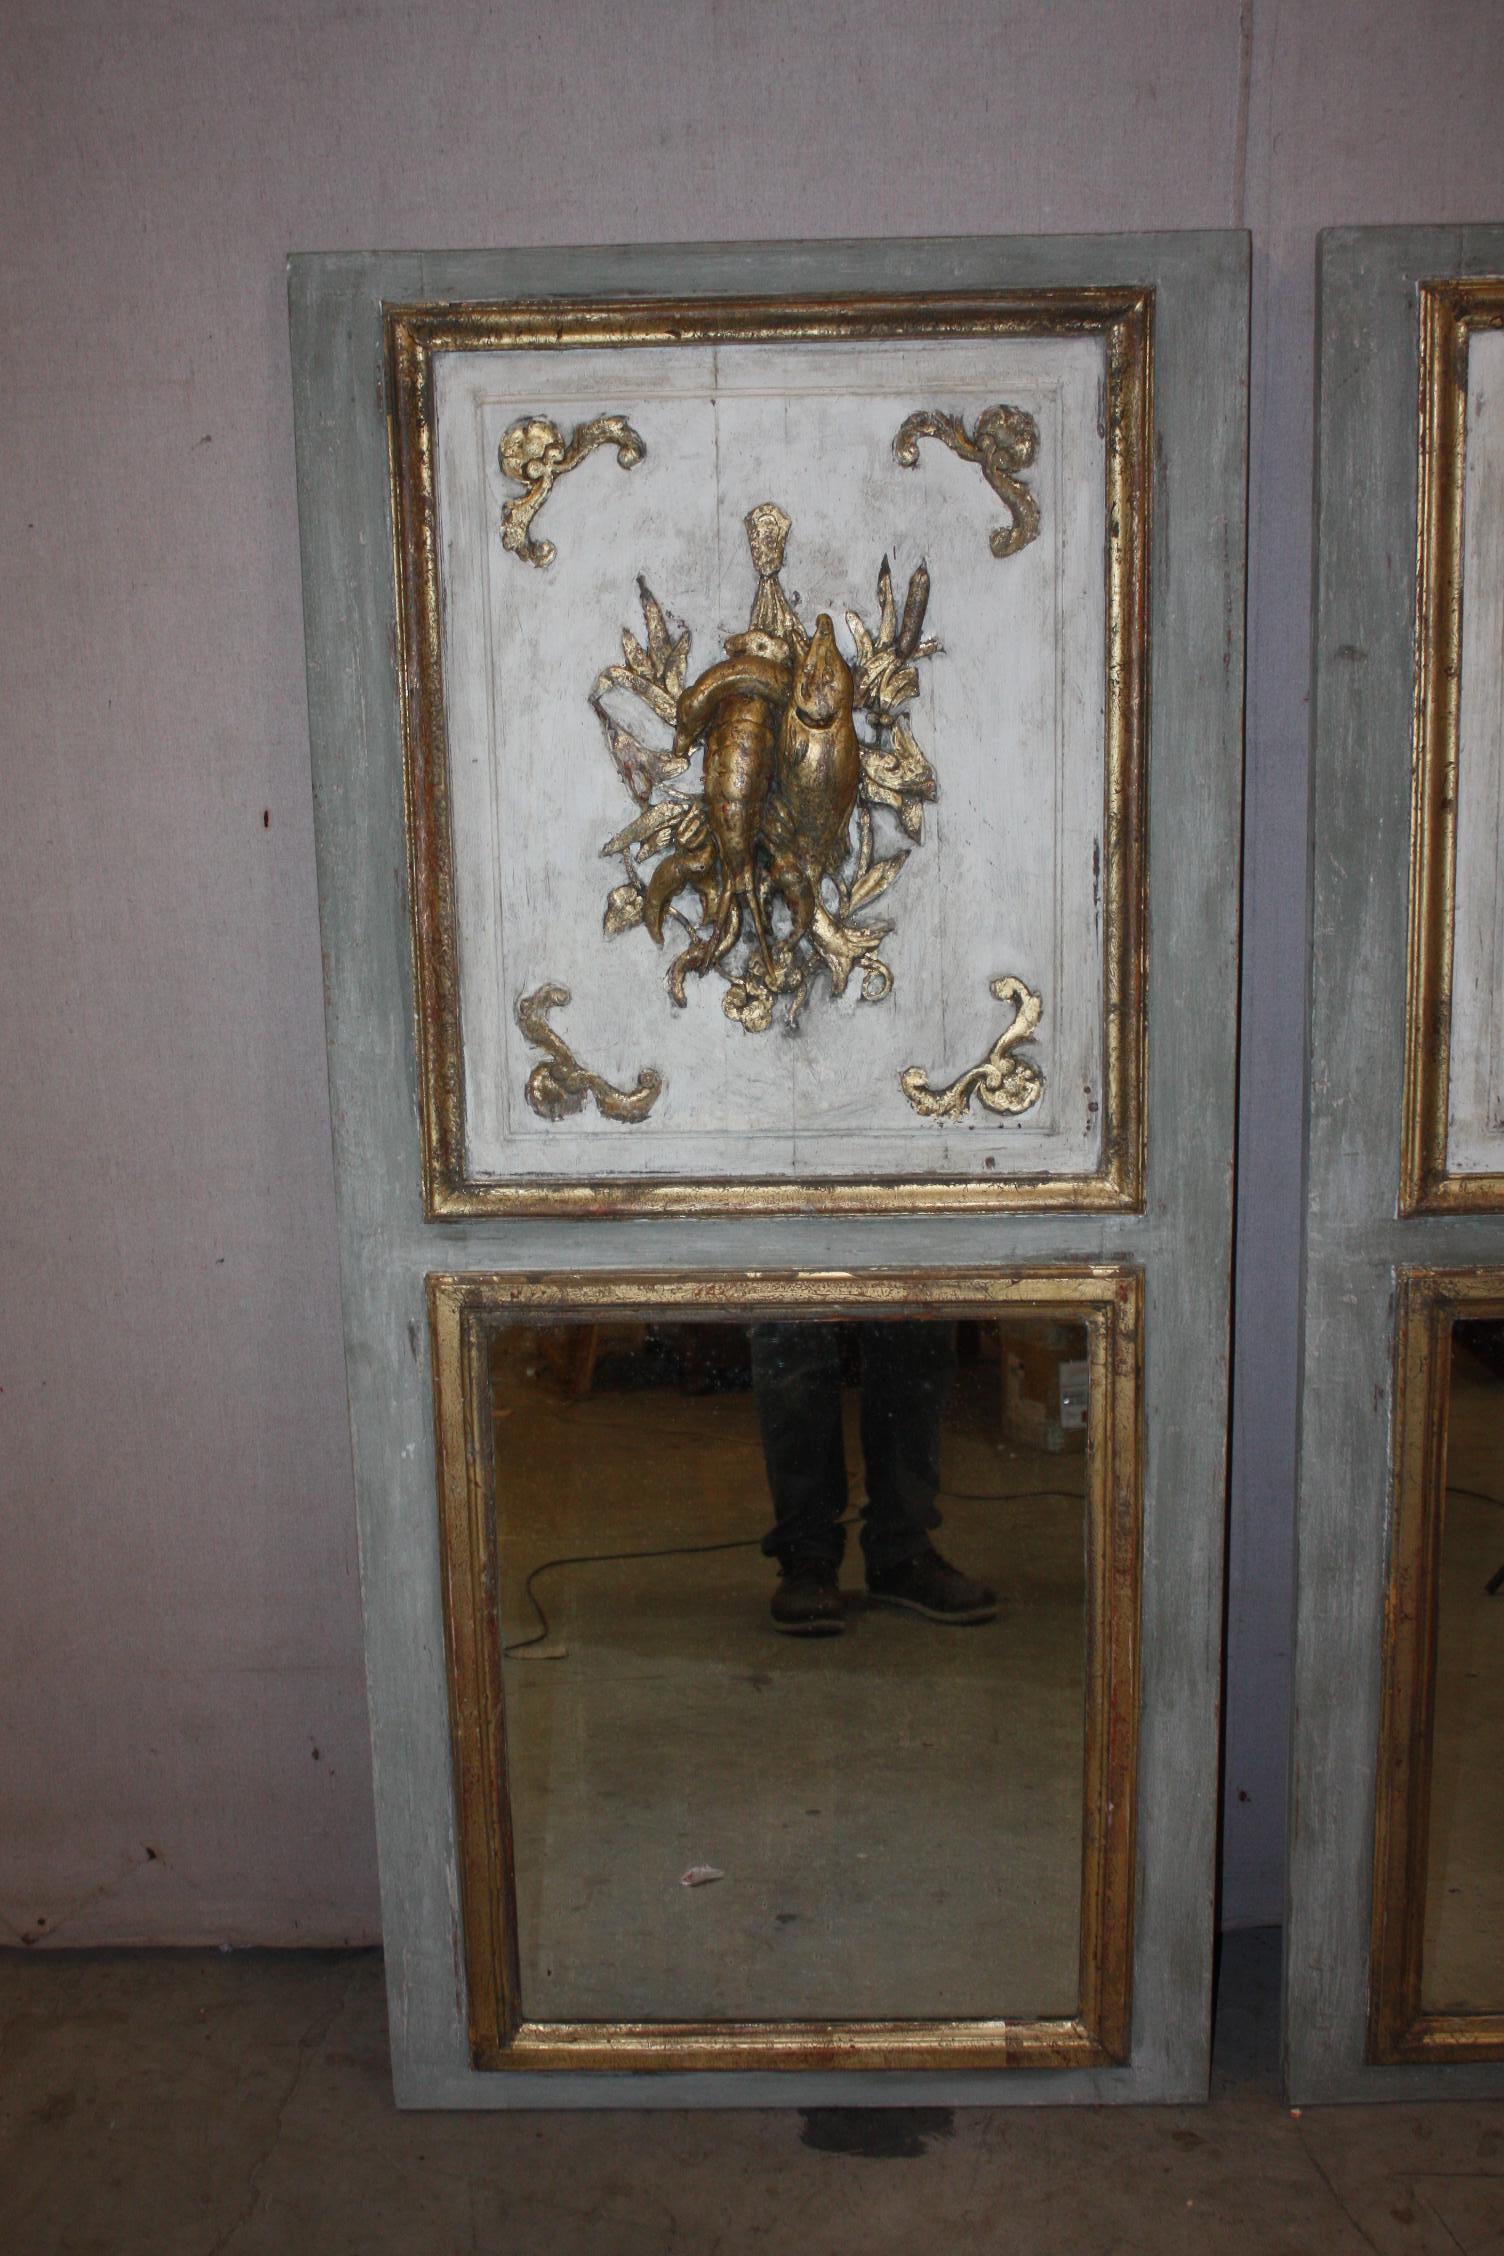 This is a very nice pair of French painted trumeau mirrors that dates to the late 1800s, early 1900s. One has a marine scene of caught fish and a lobster carved. The other has a woodcock carved. The gold is gilded.